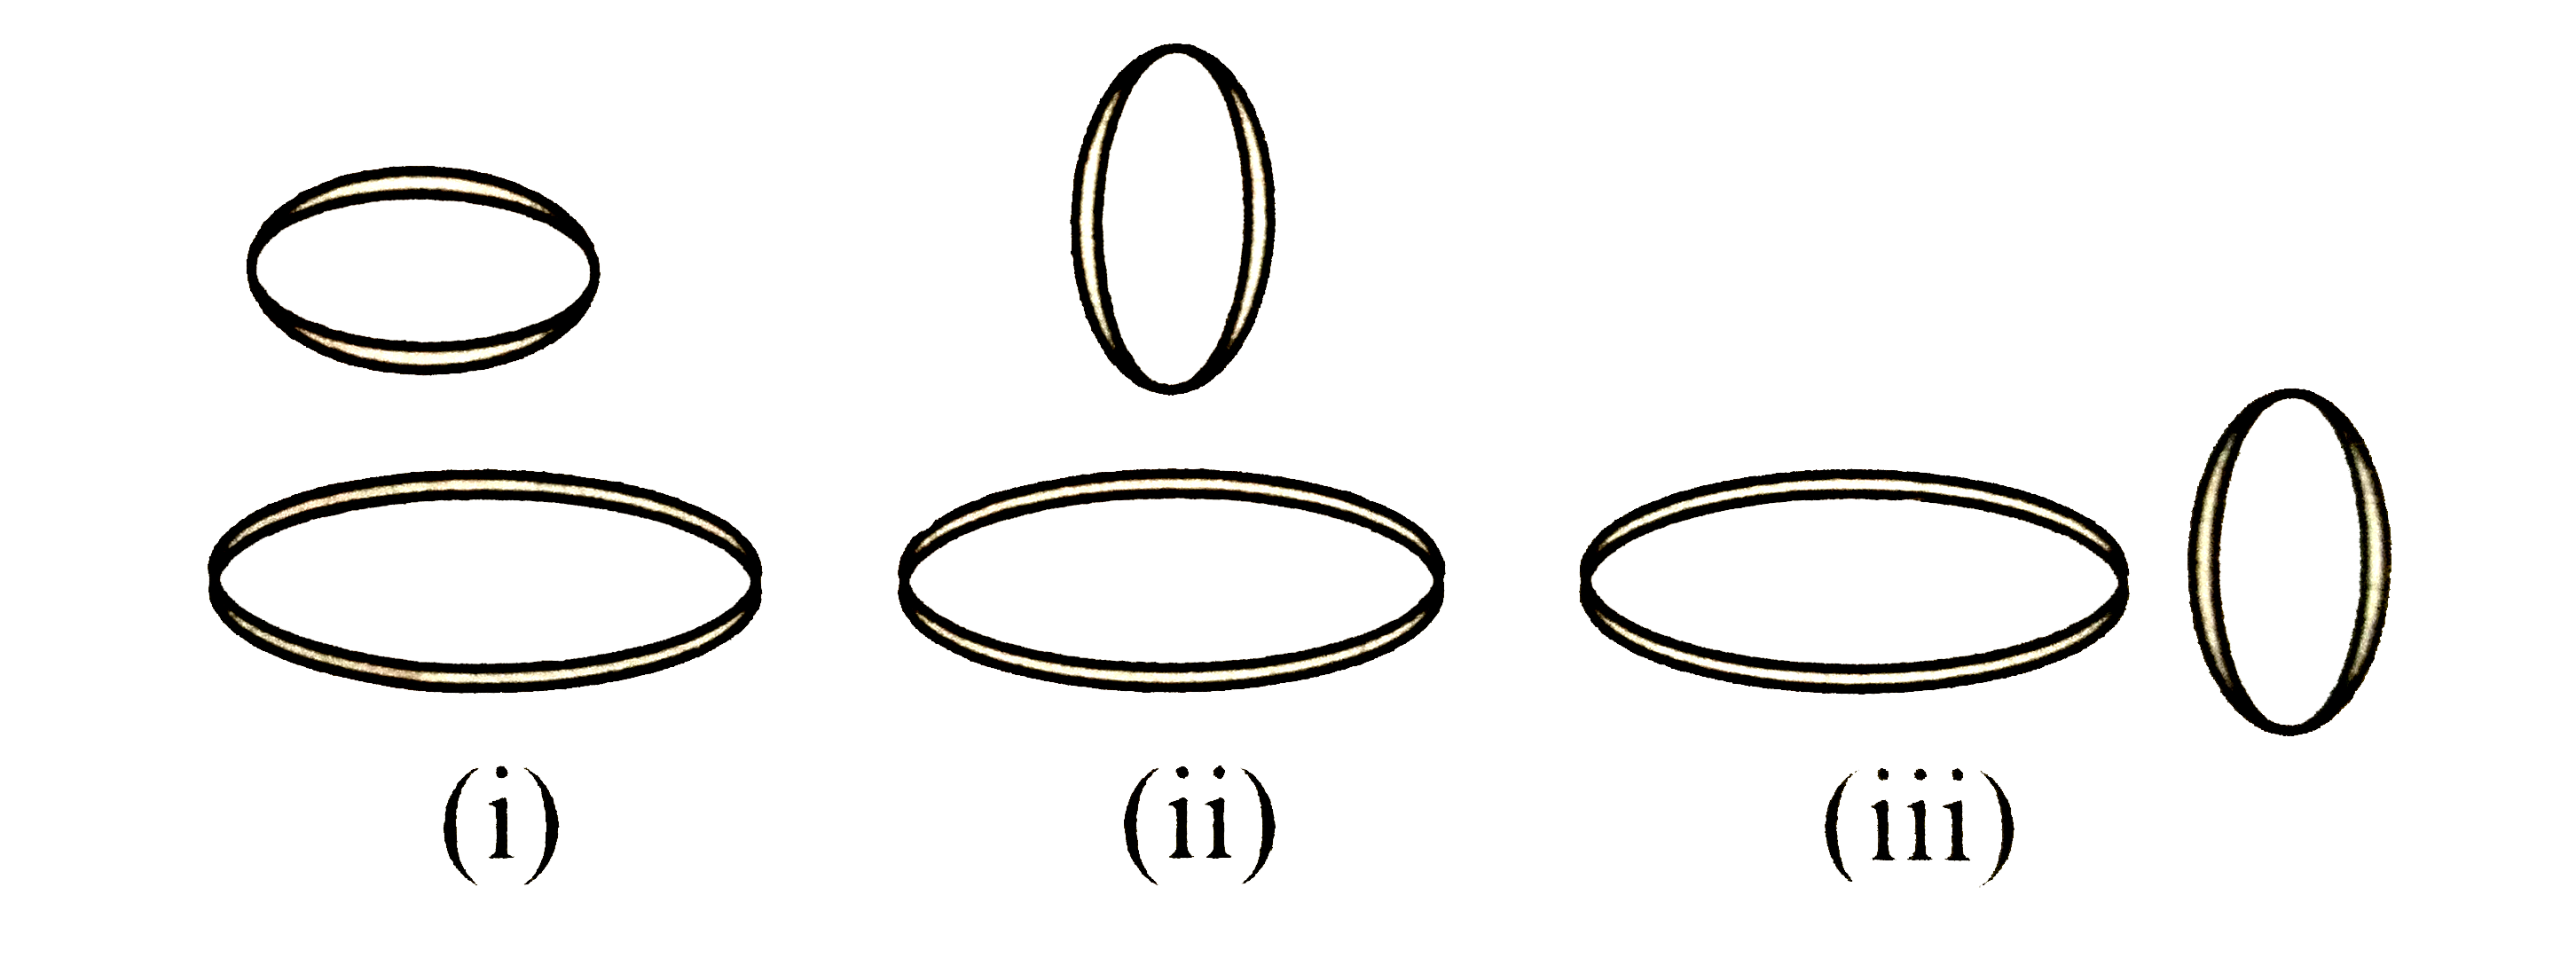 Two circular coils can be arranged in any of three situations as shown in the figure. Their mutual inductance will be